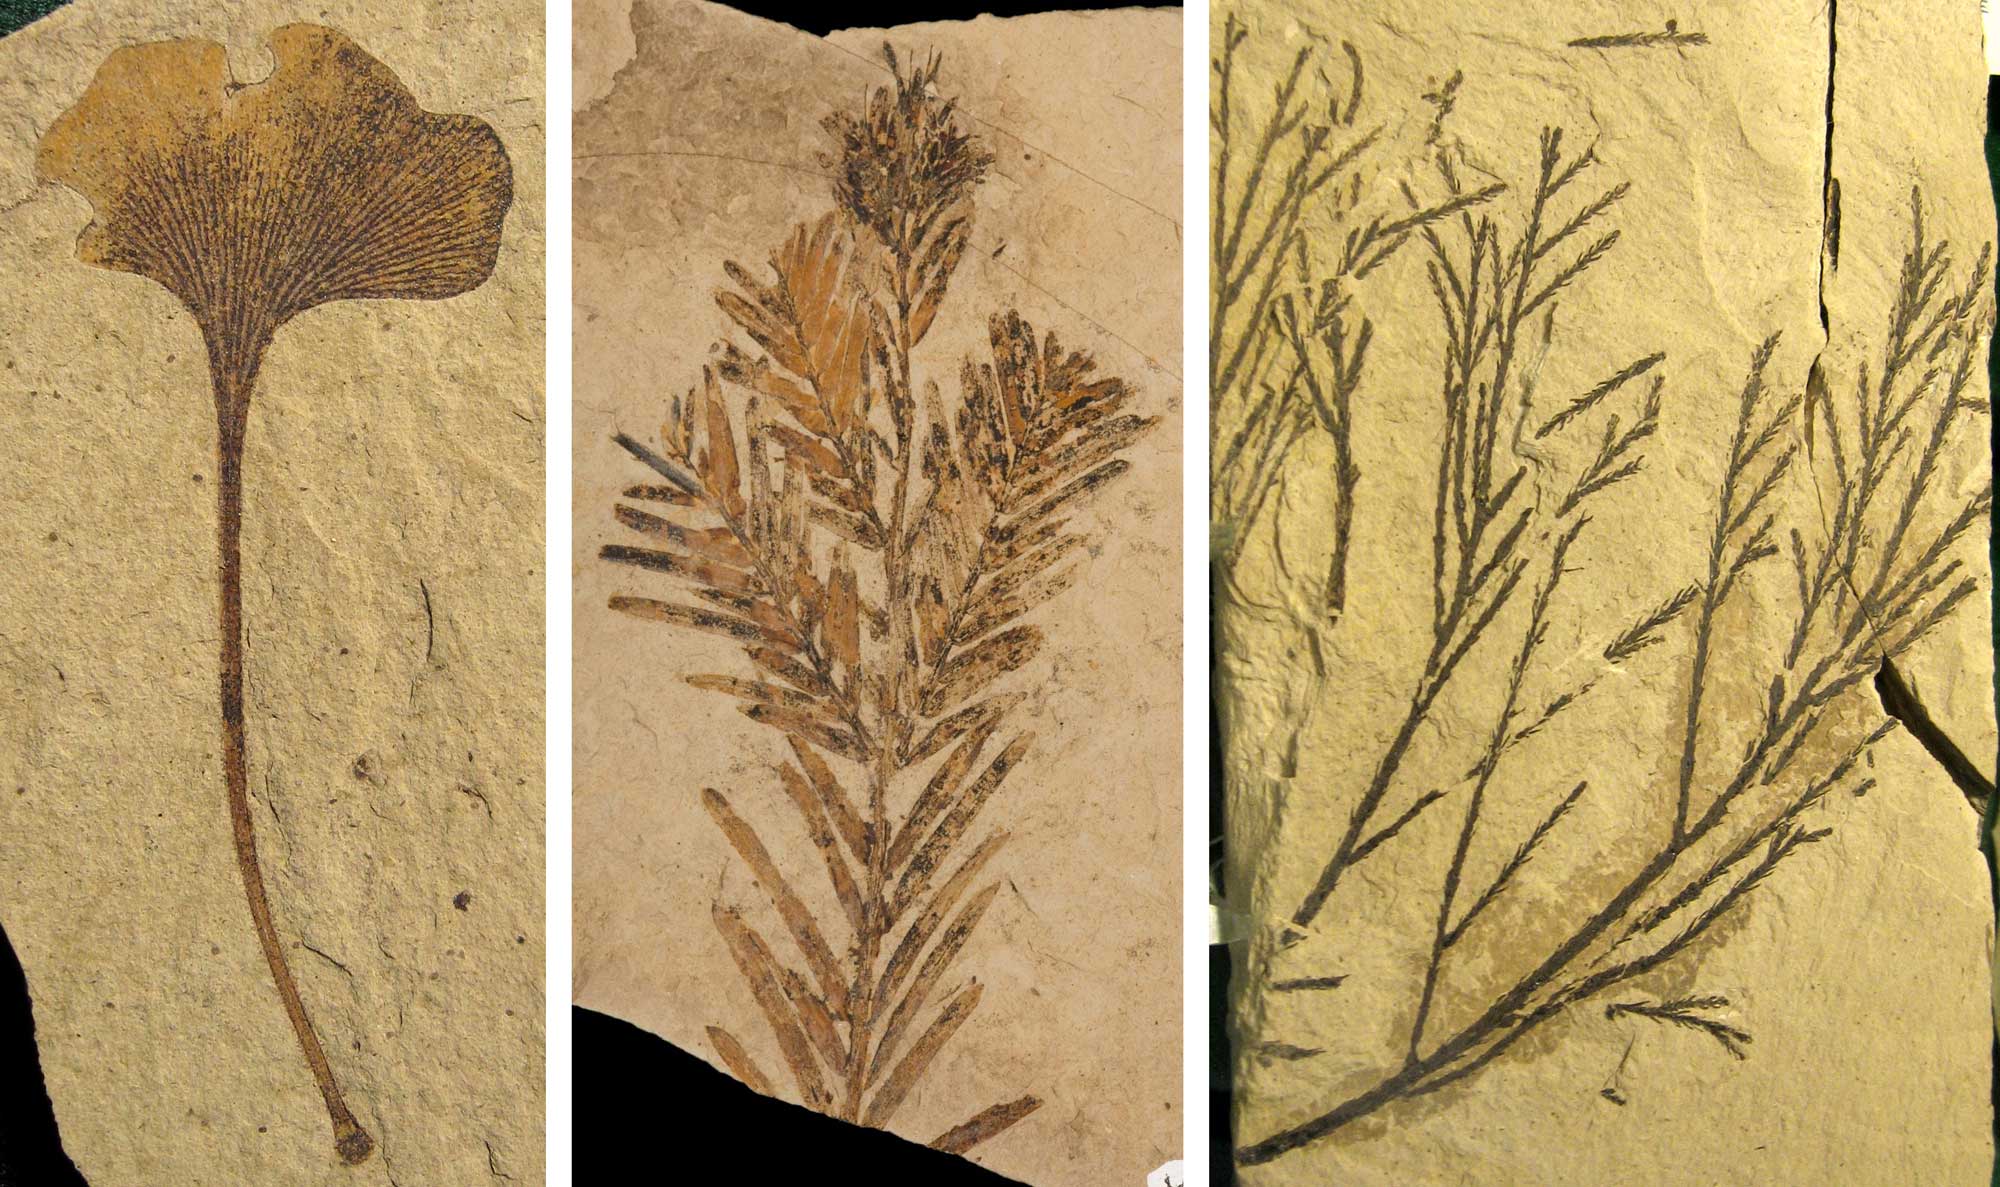 3-panel image of photographs showing fossil gymnosperms from the Eocene of Republic, Washington. Panel 1. A long-stalk ginkgo leaf with a fan-shaped blade with forking veins. Panel 2. Branchlets (small branches) of a dawn redwood with needle-like leaves. Panel 3. Graceful branches of water pine with scale-like leaves.